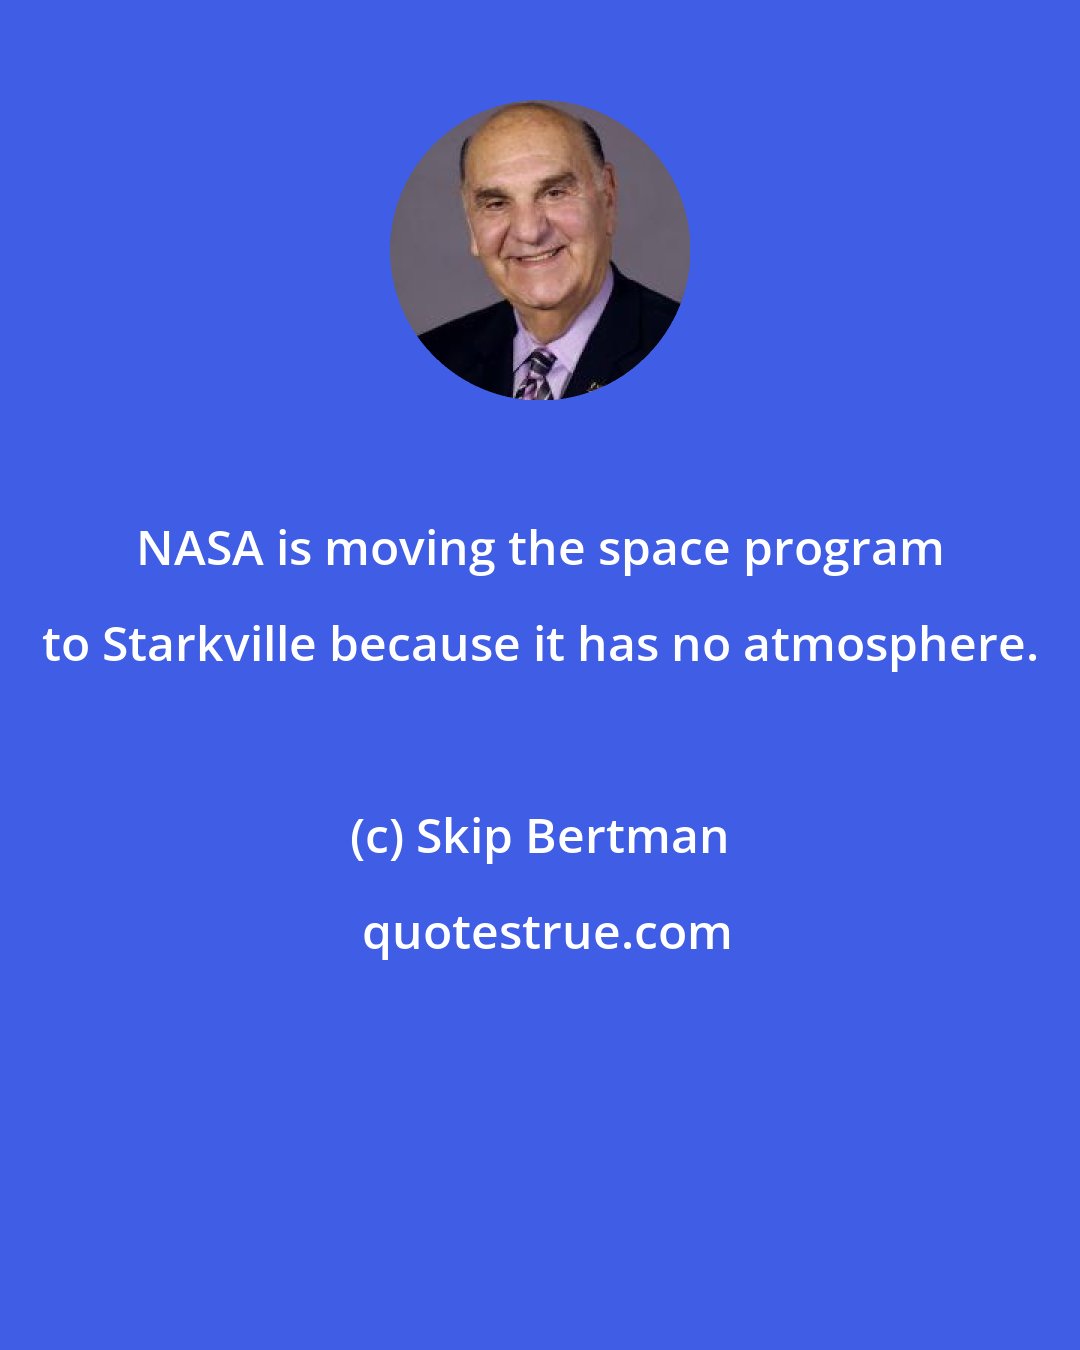 Skip Bertman: NASA is moving the space program to Starkville because it has no atmosphere.